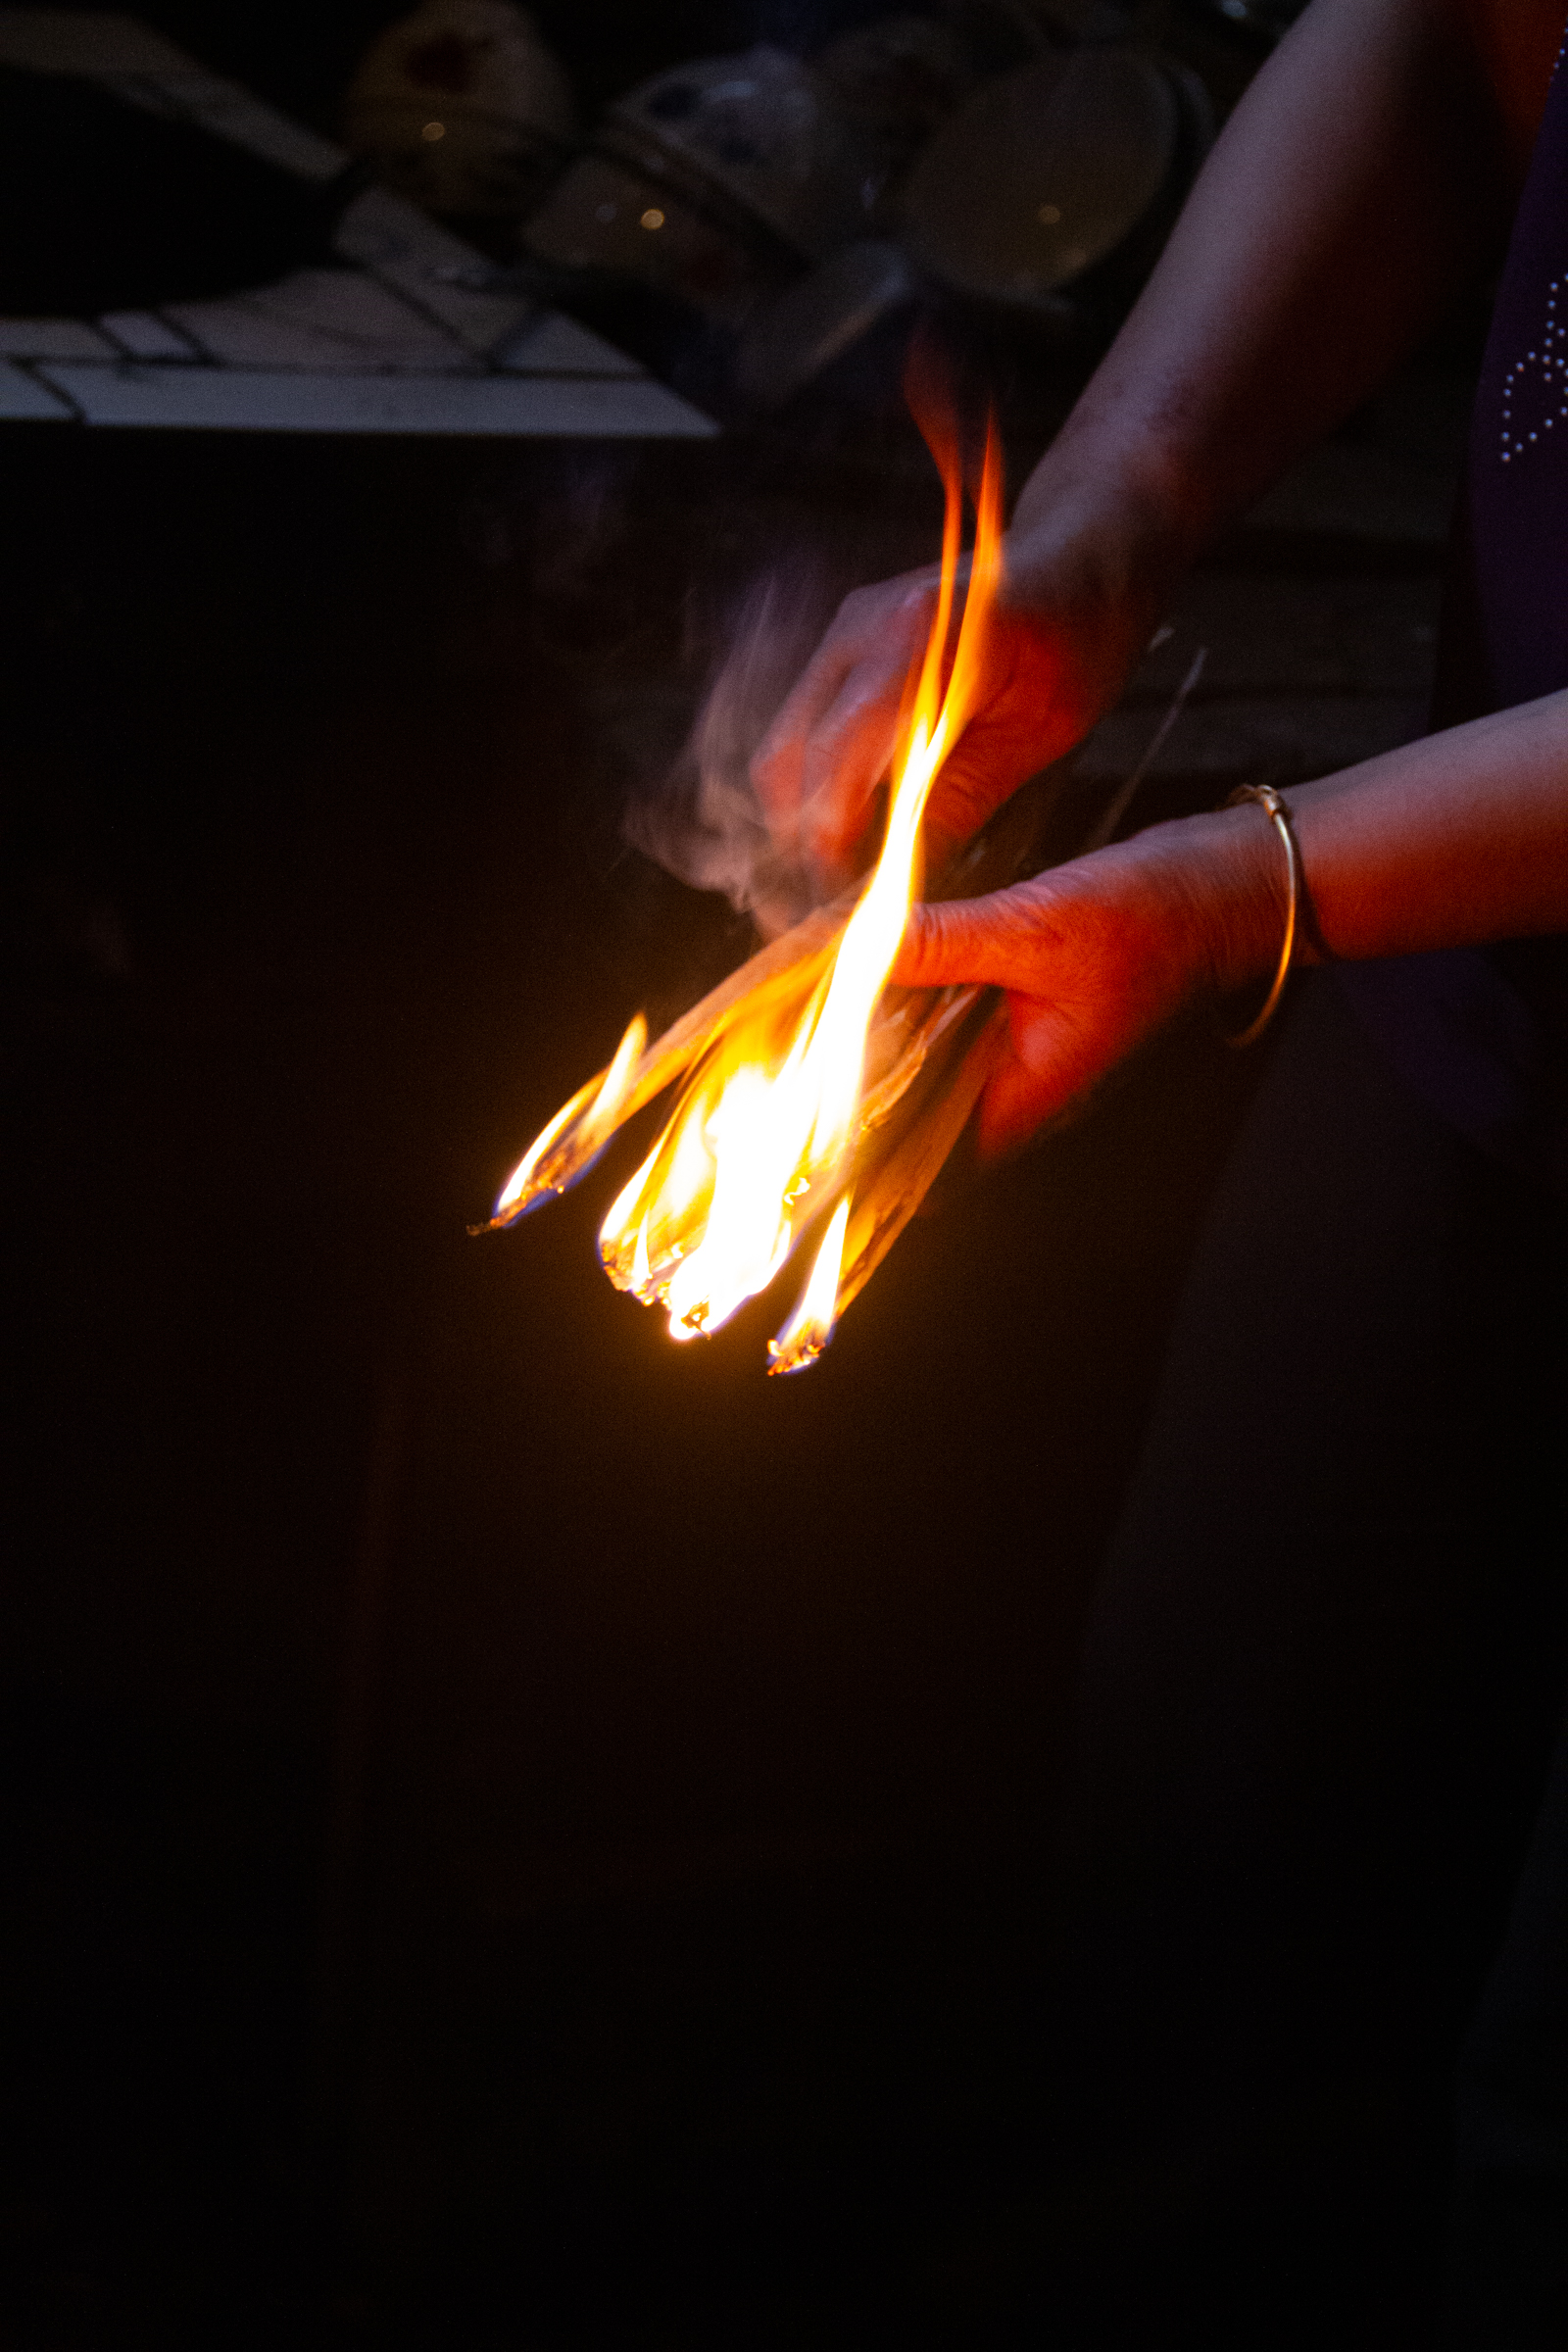 A person holding a burning kindling